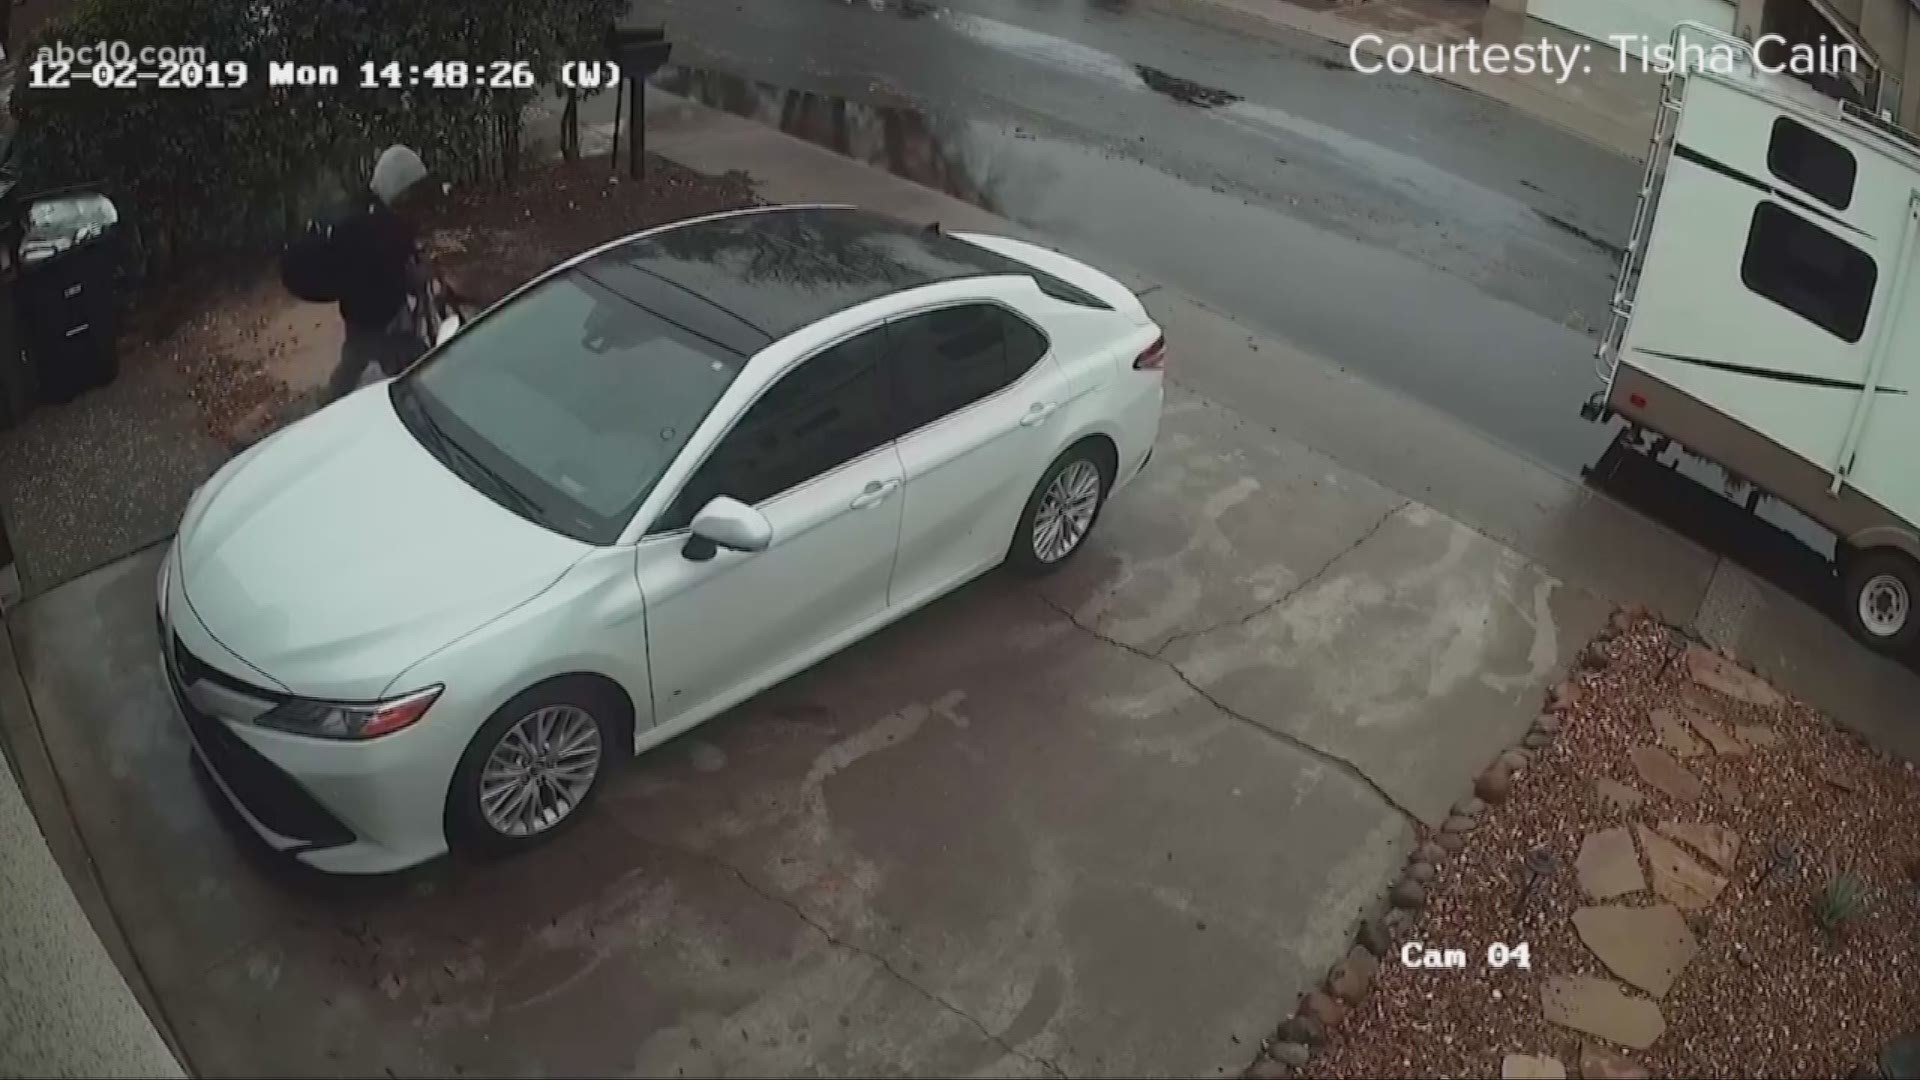 A Modesto homeowner's security camera spots a thief stealing a wallet, checkbook and a baby security blanket from her car that was parked outside of her home.